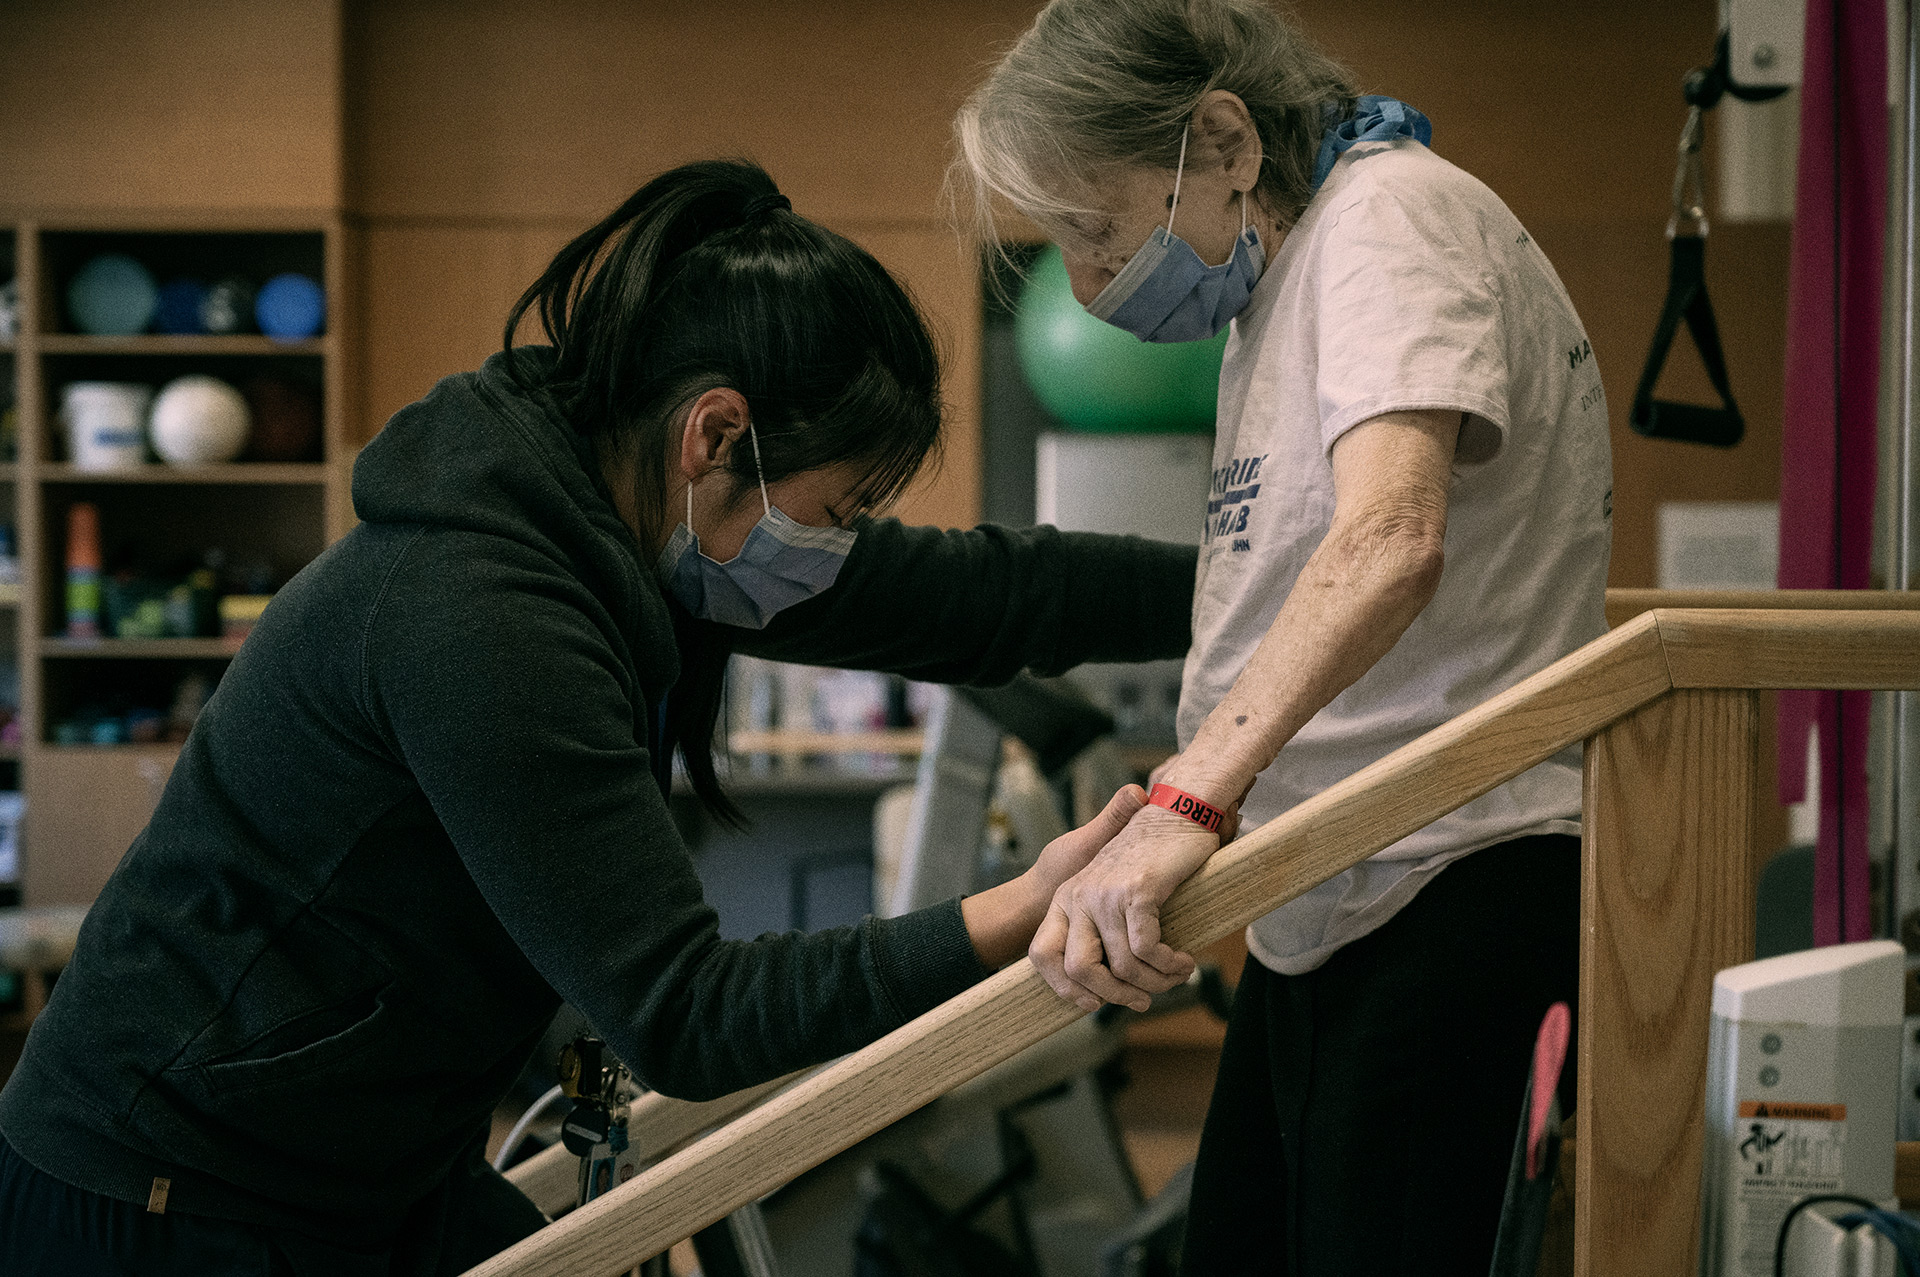 A patient at Toronto Rehab working with physiotherapist Vanessa Ong on safely maneuvering stairs.